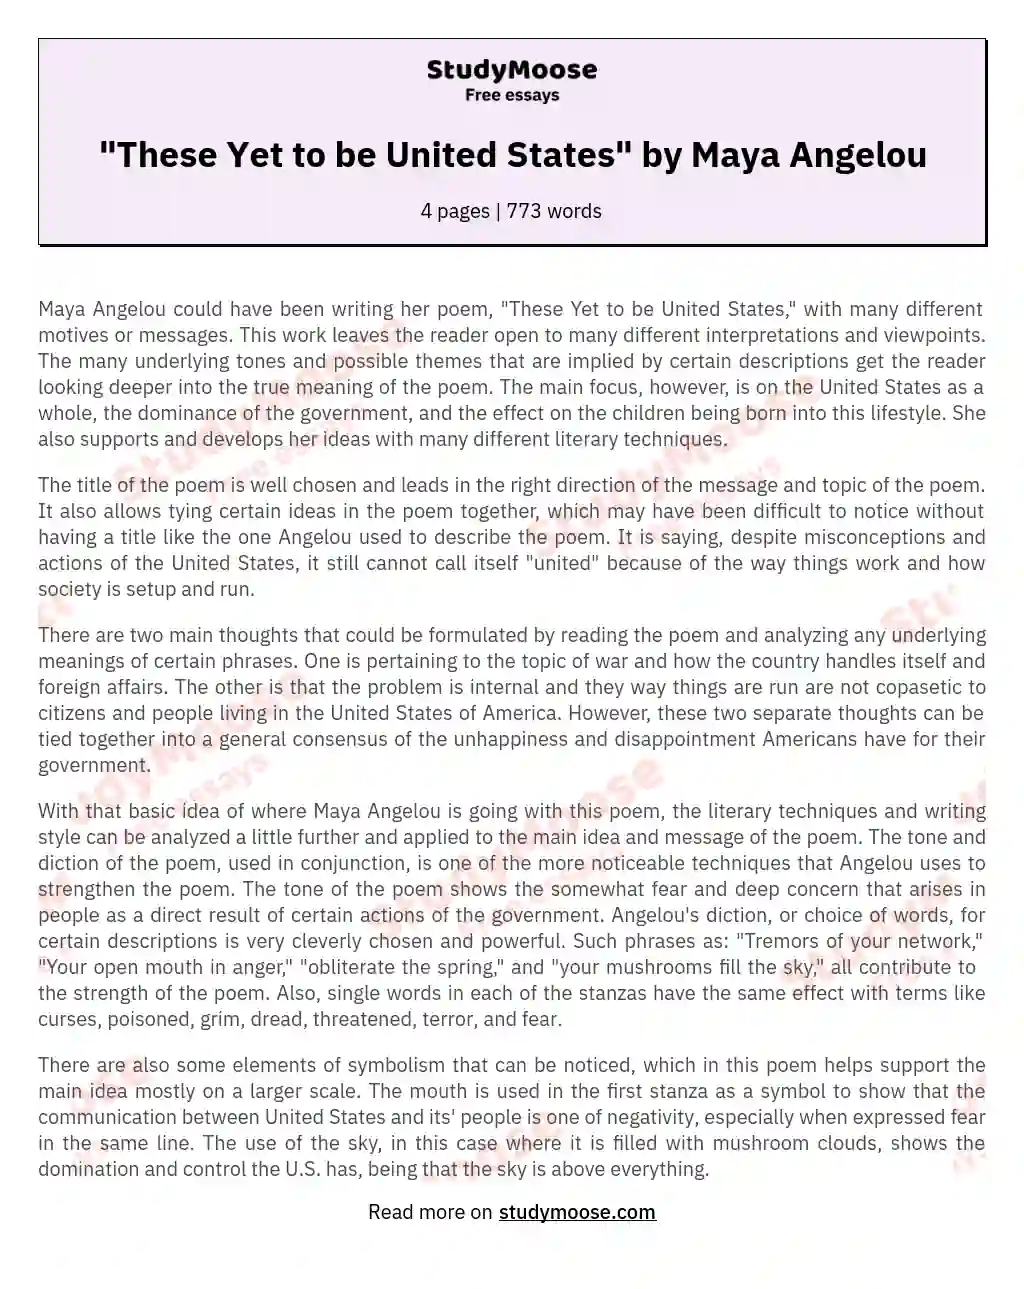 "These Yet to be United States" by Maya Angelou essay